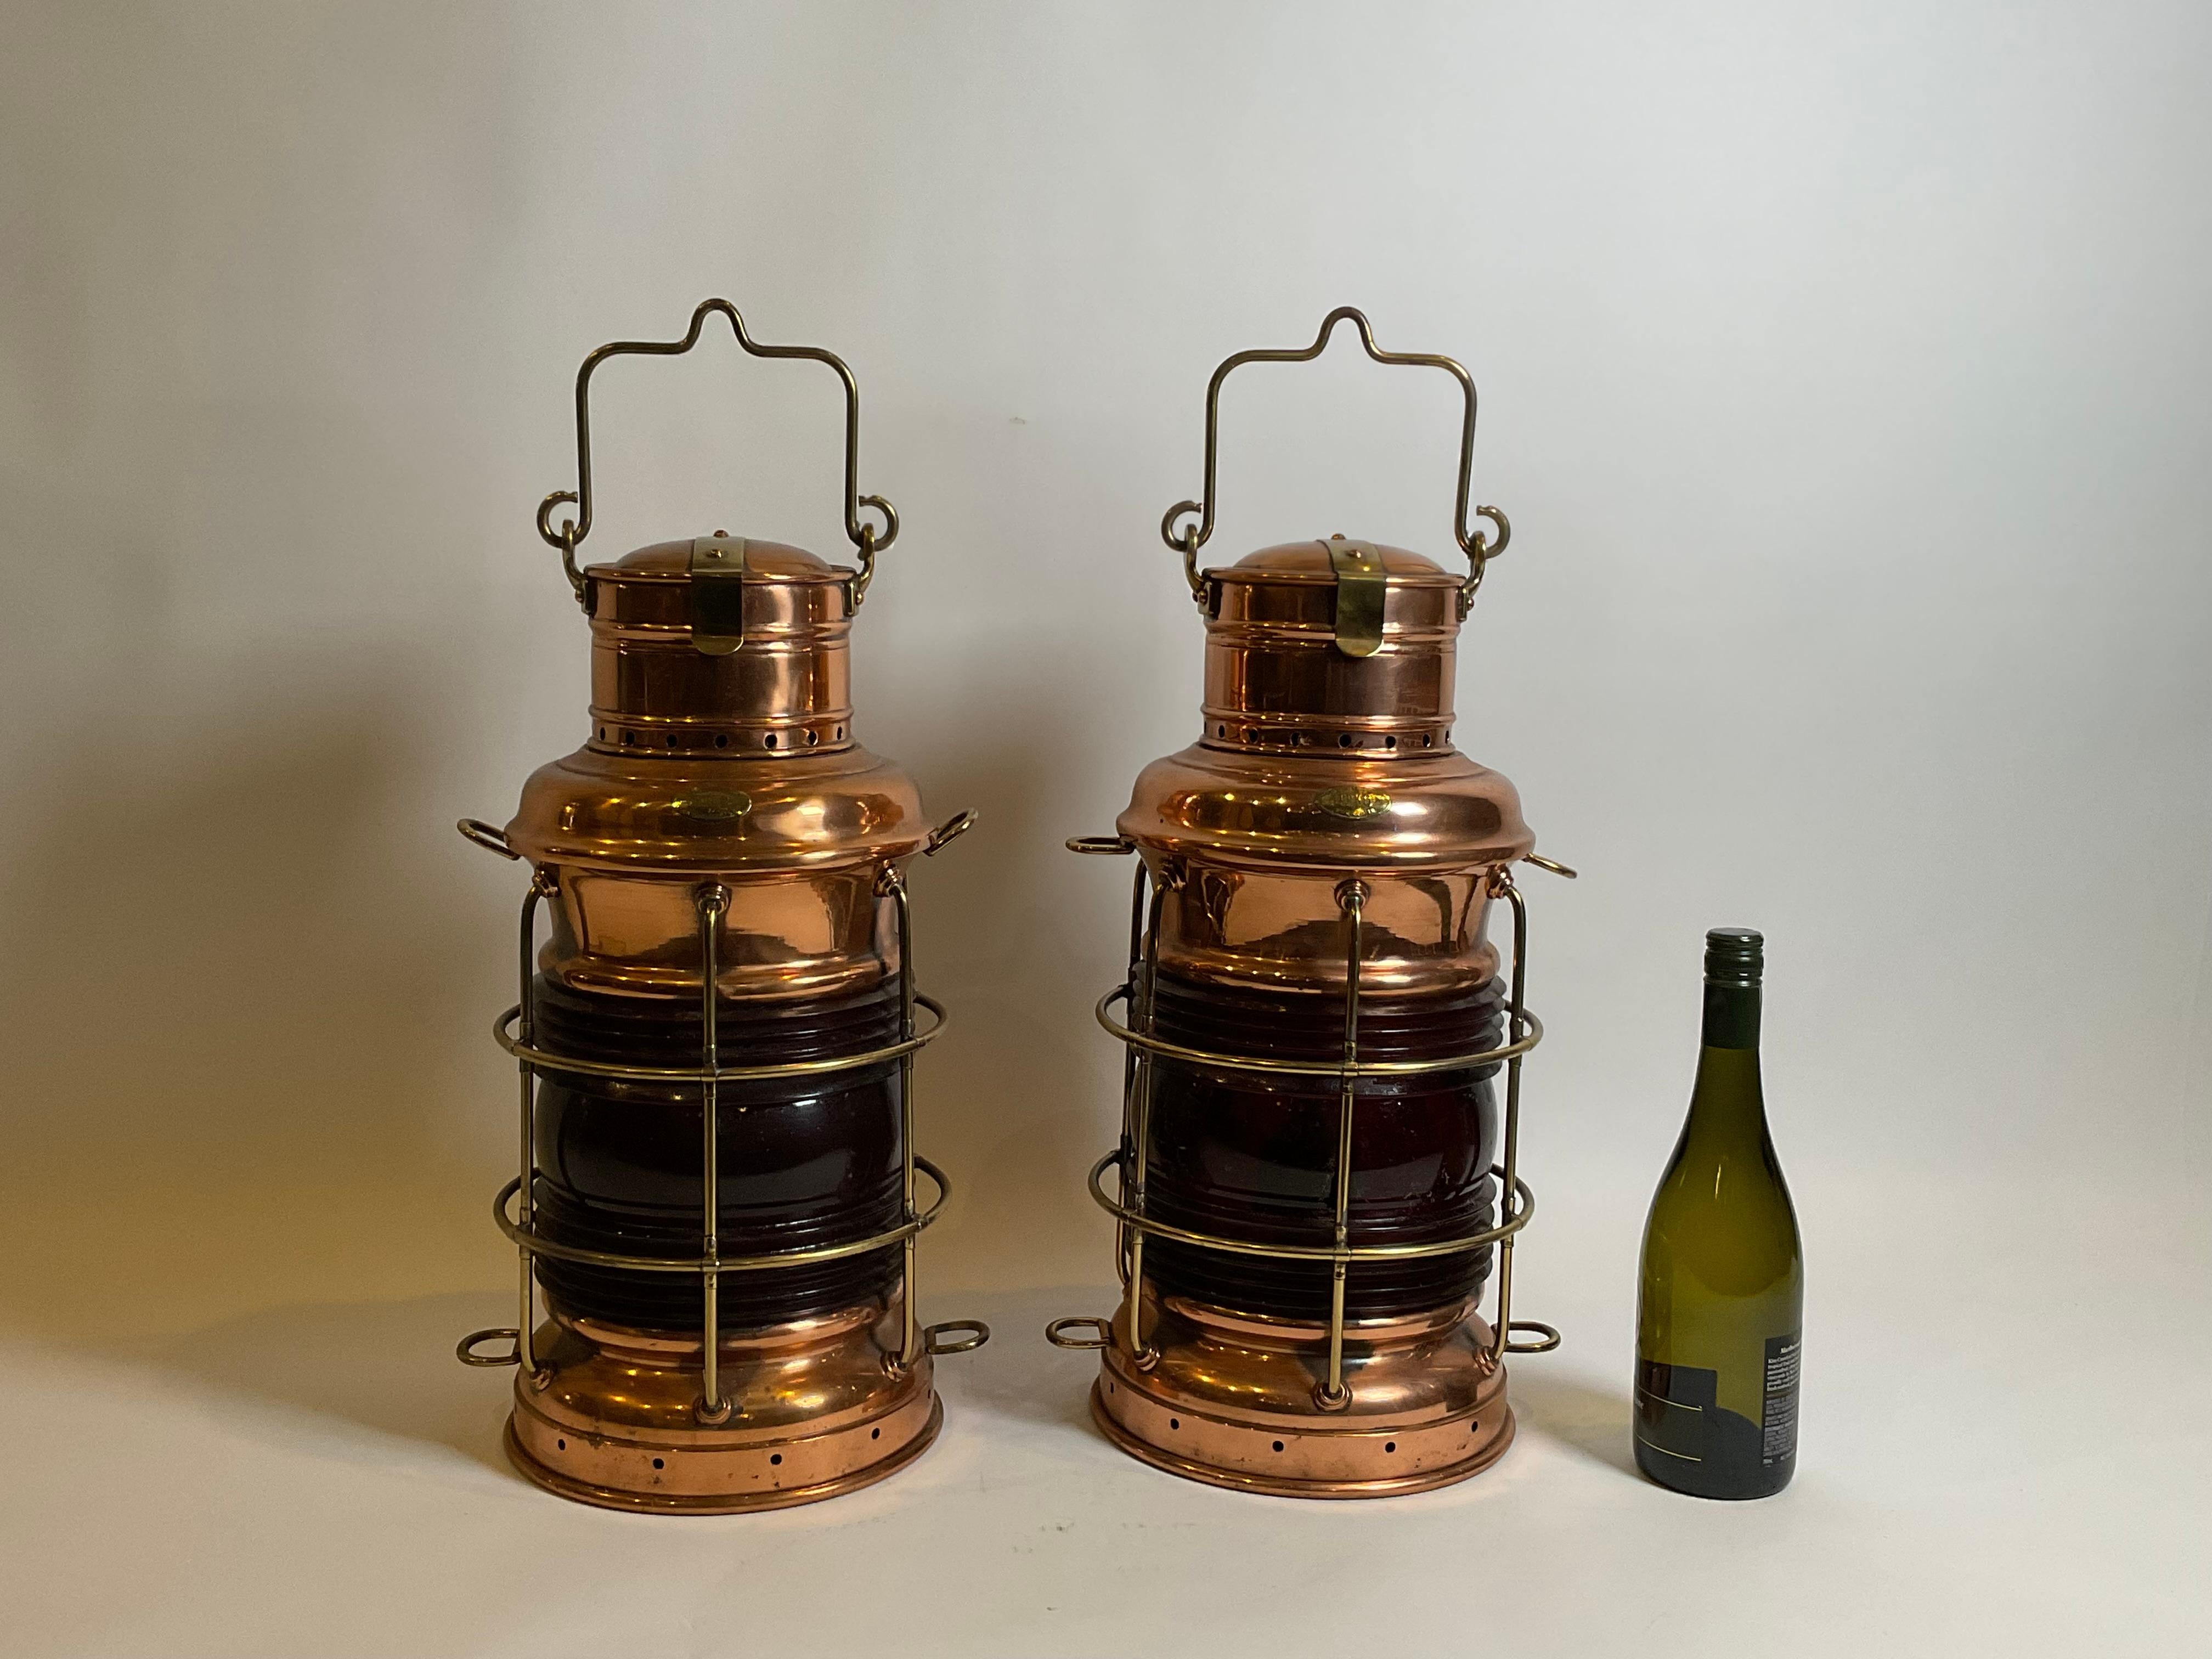 Pair of solid copper ships lanterns by Perkins Marine of Brooklyn New York, 